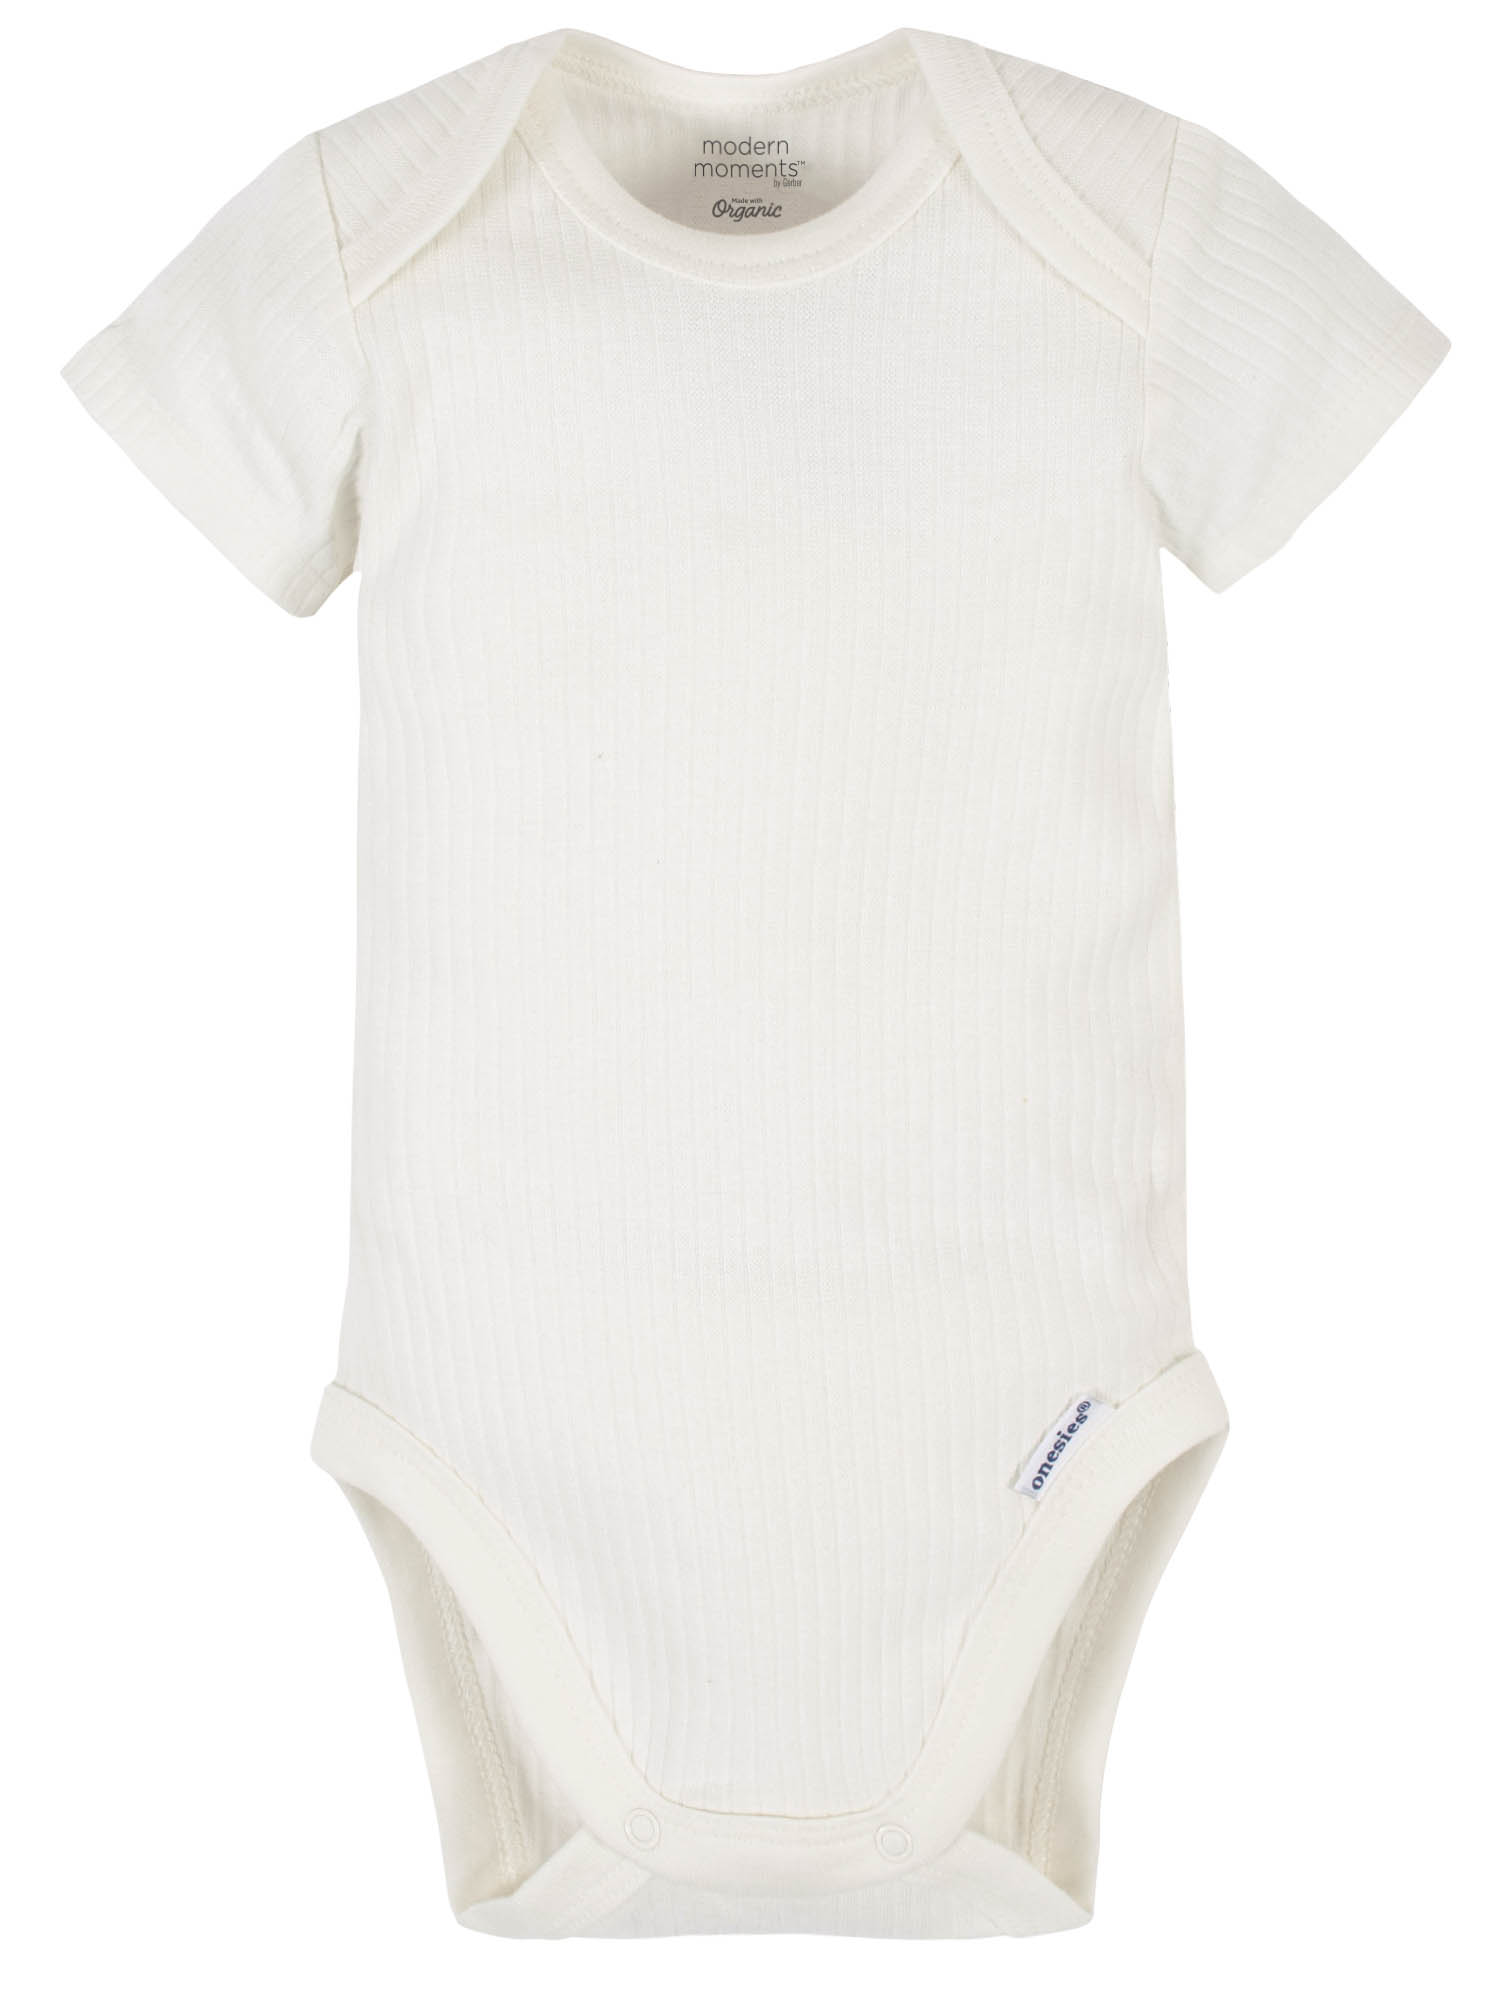 Modern Moments by Gerber Baby Boy Bodysuit, Coveralls, and Pants Outfit Set, 3-Piece (Newborn-12M) - image 5 of 9